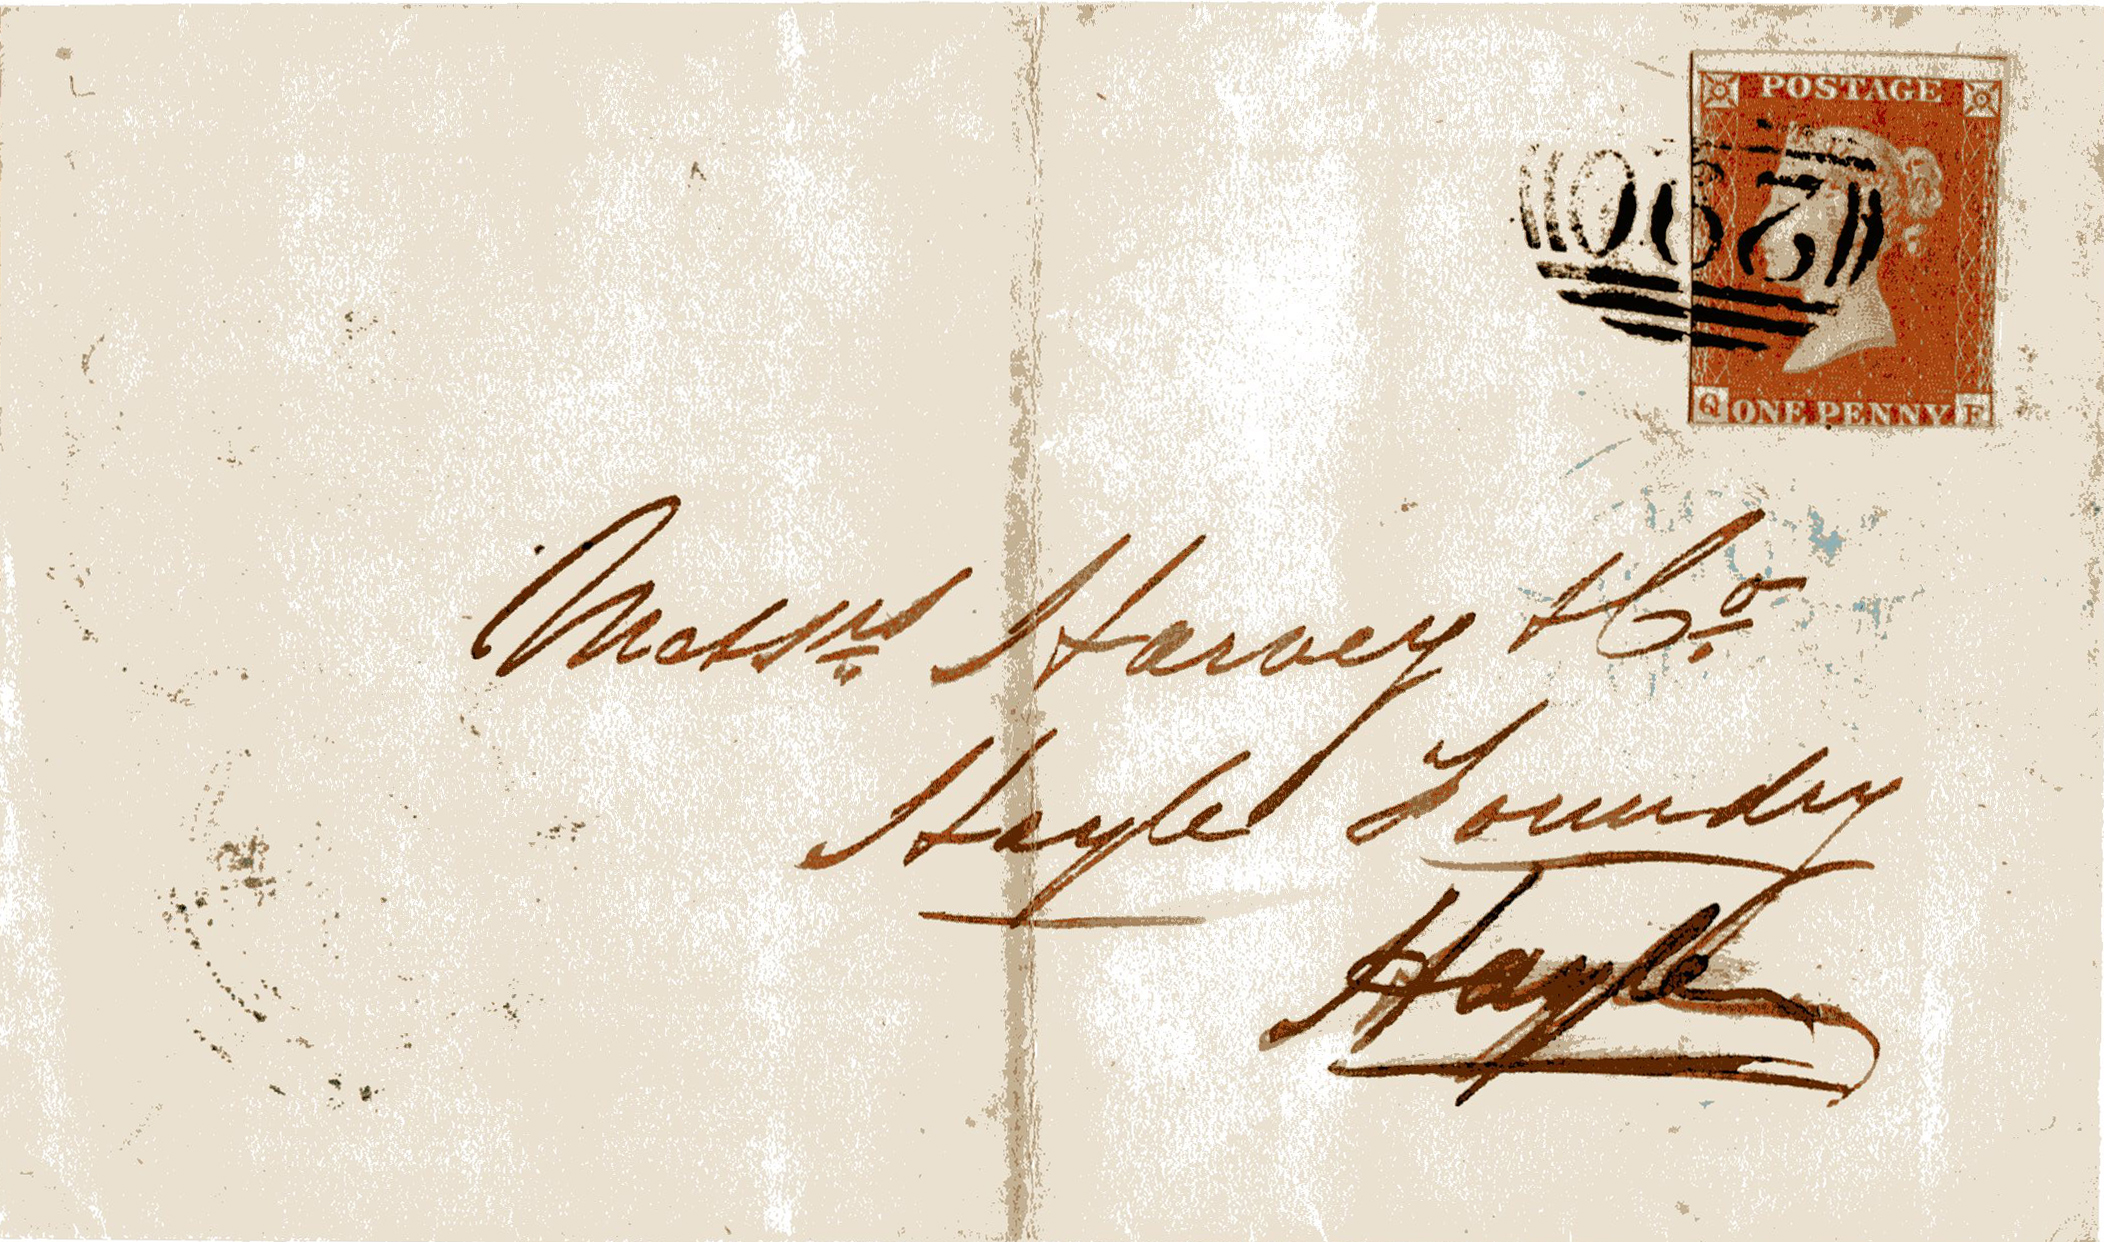 To Harveys, Hayle 26th October 1850